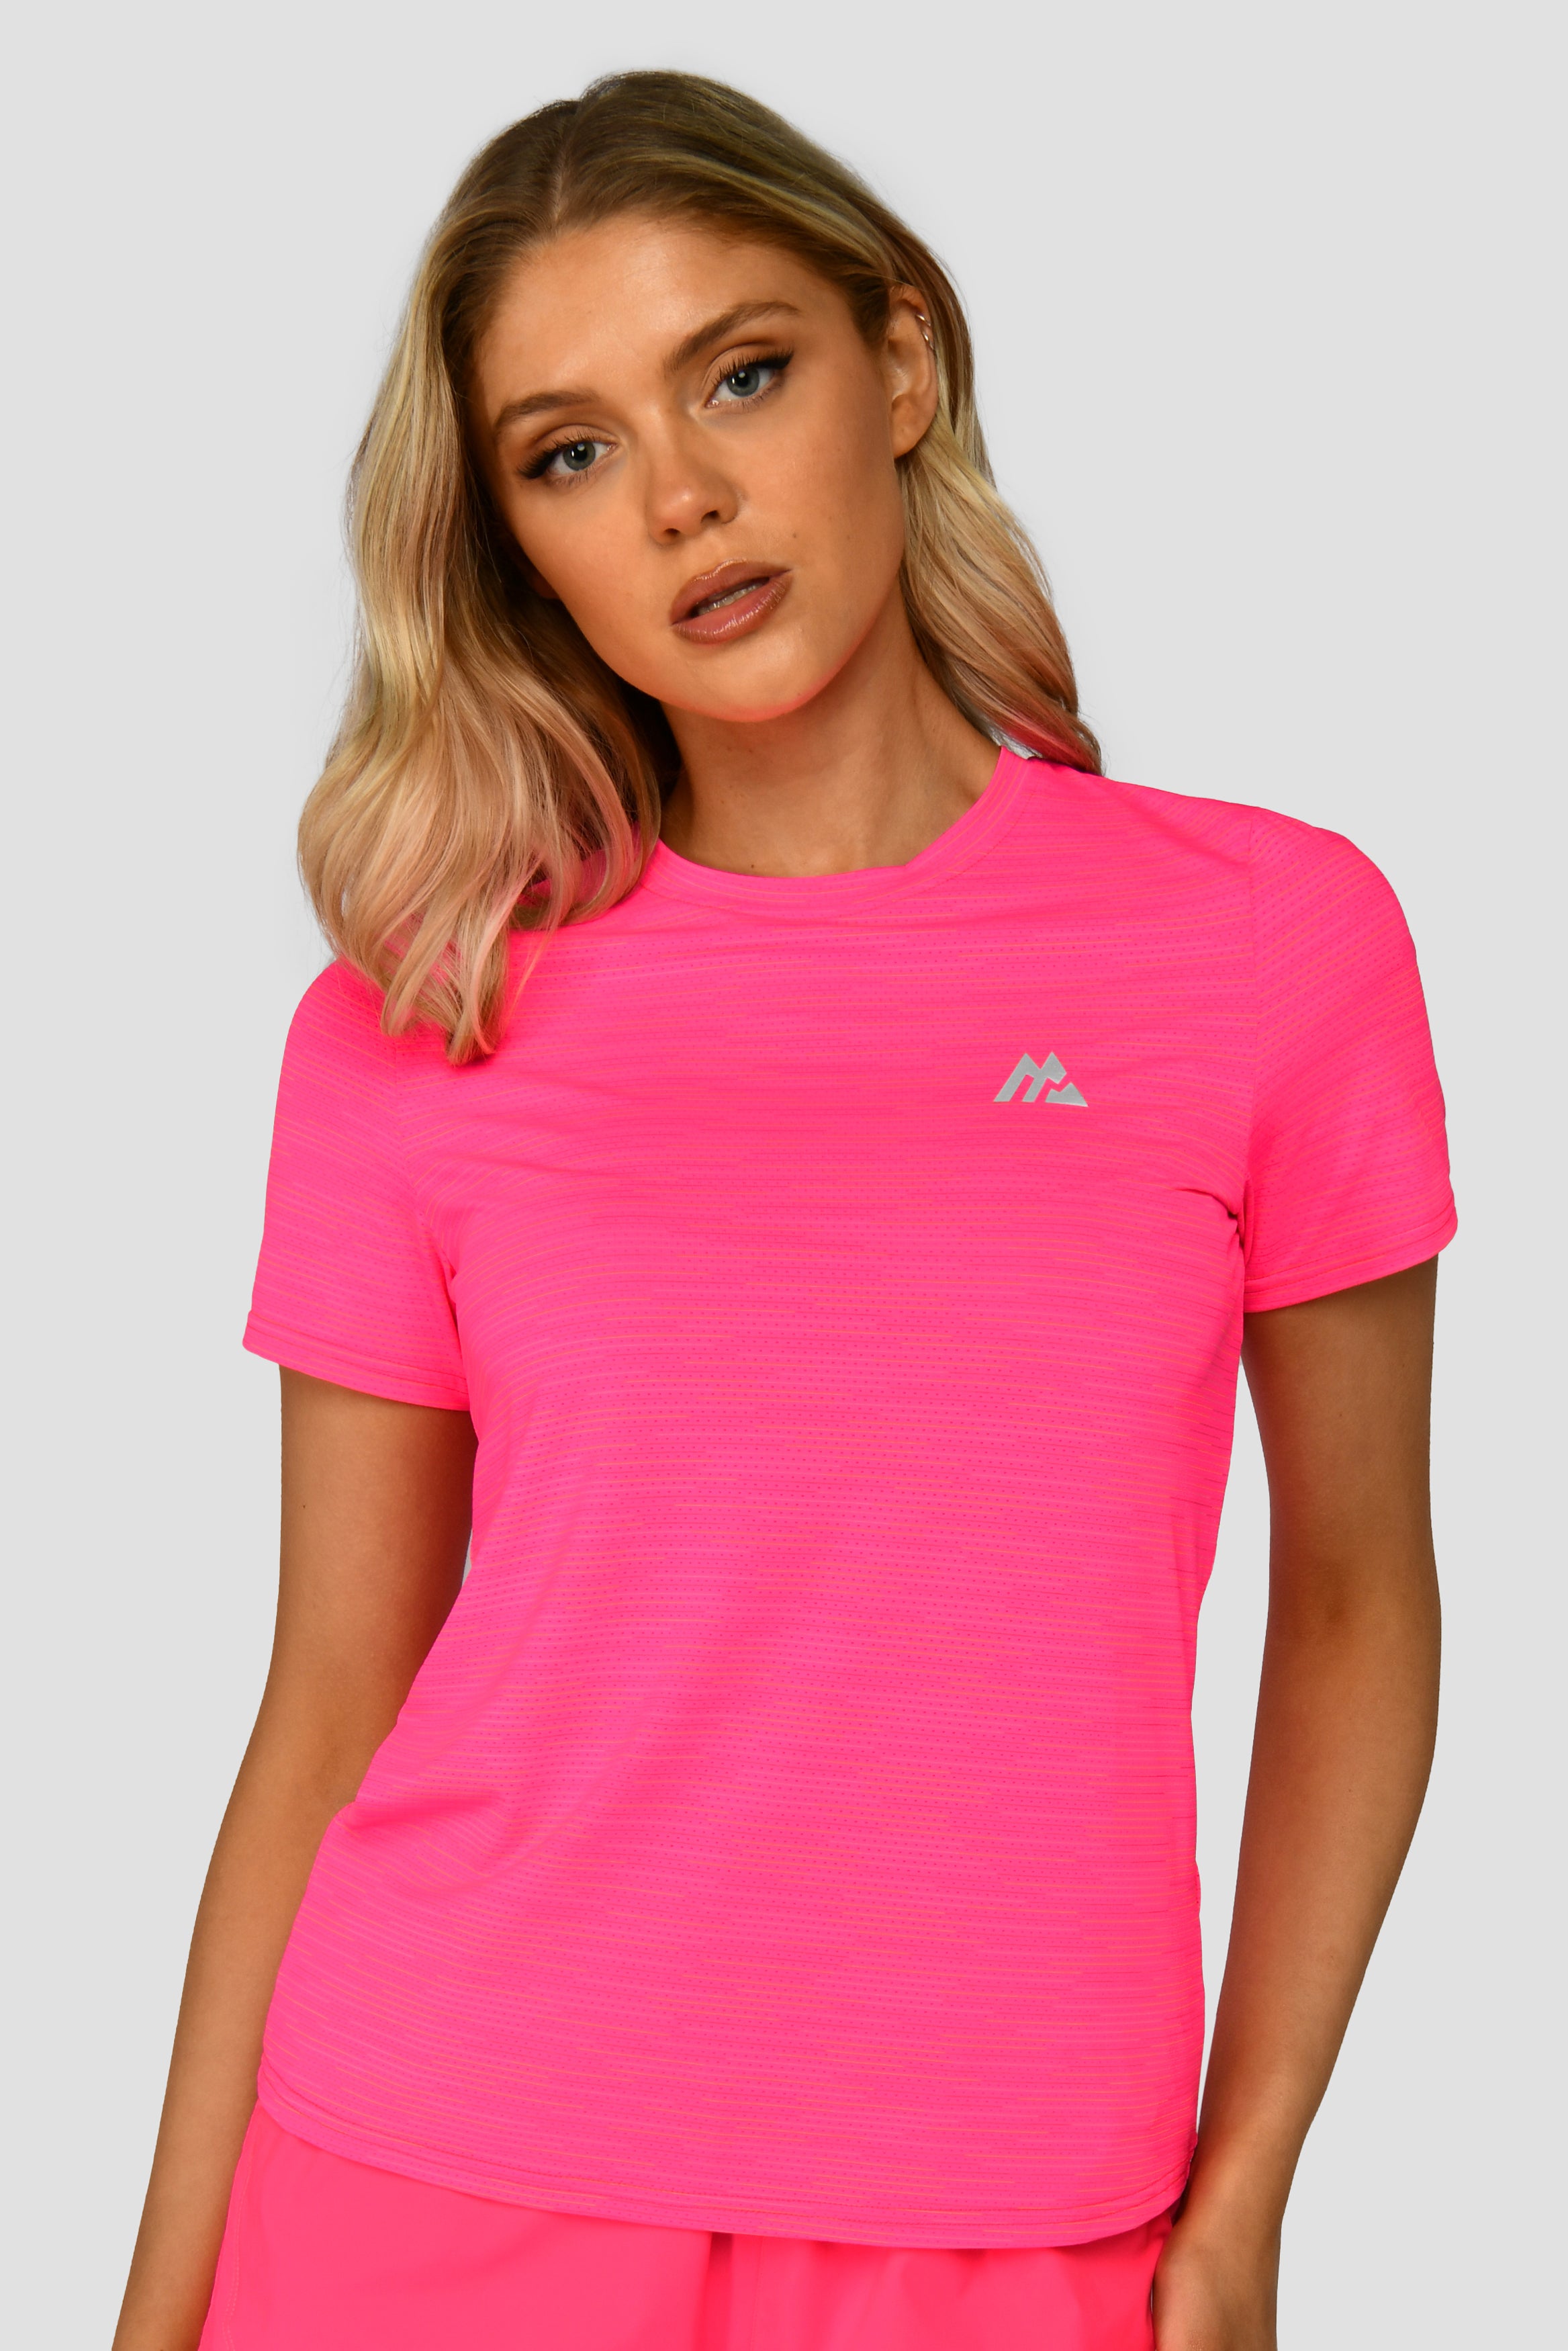 Fly 2.0 T-Shirt - Neon Pink